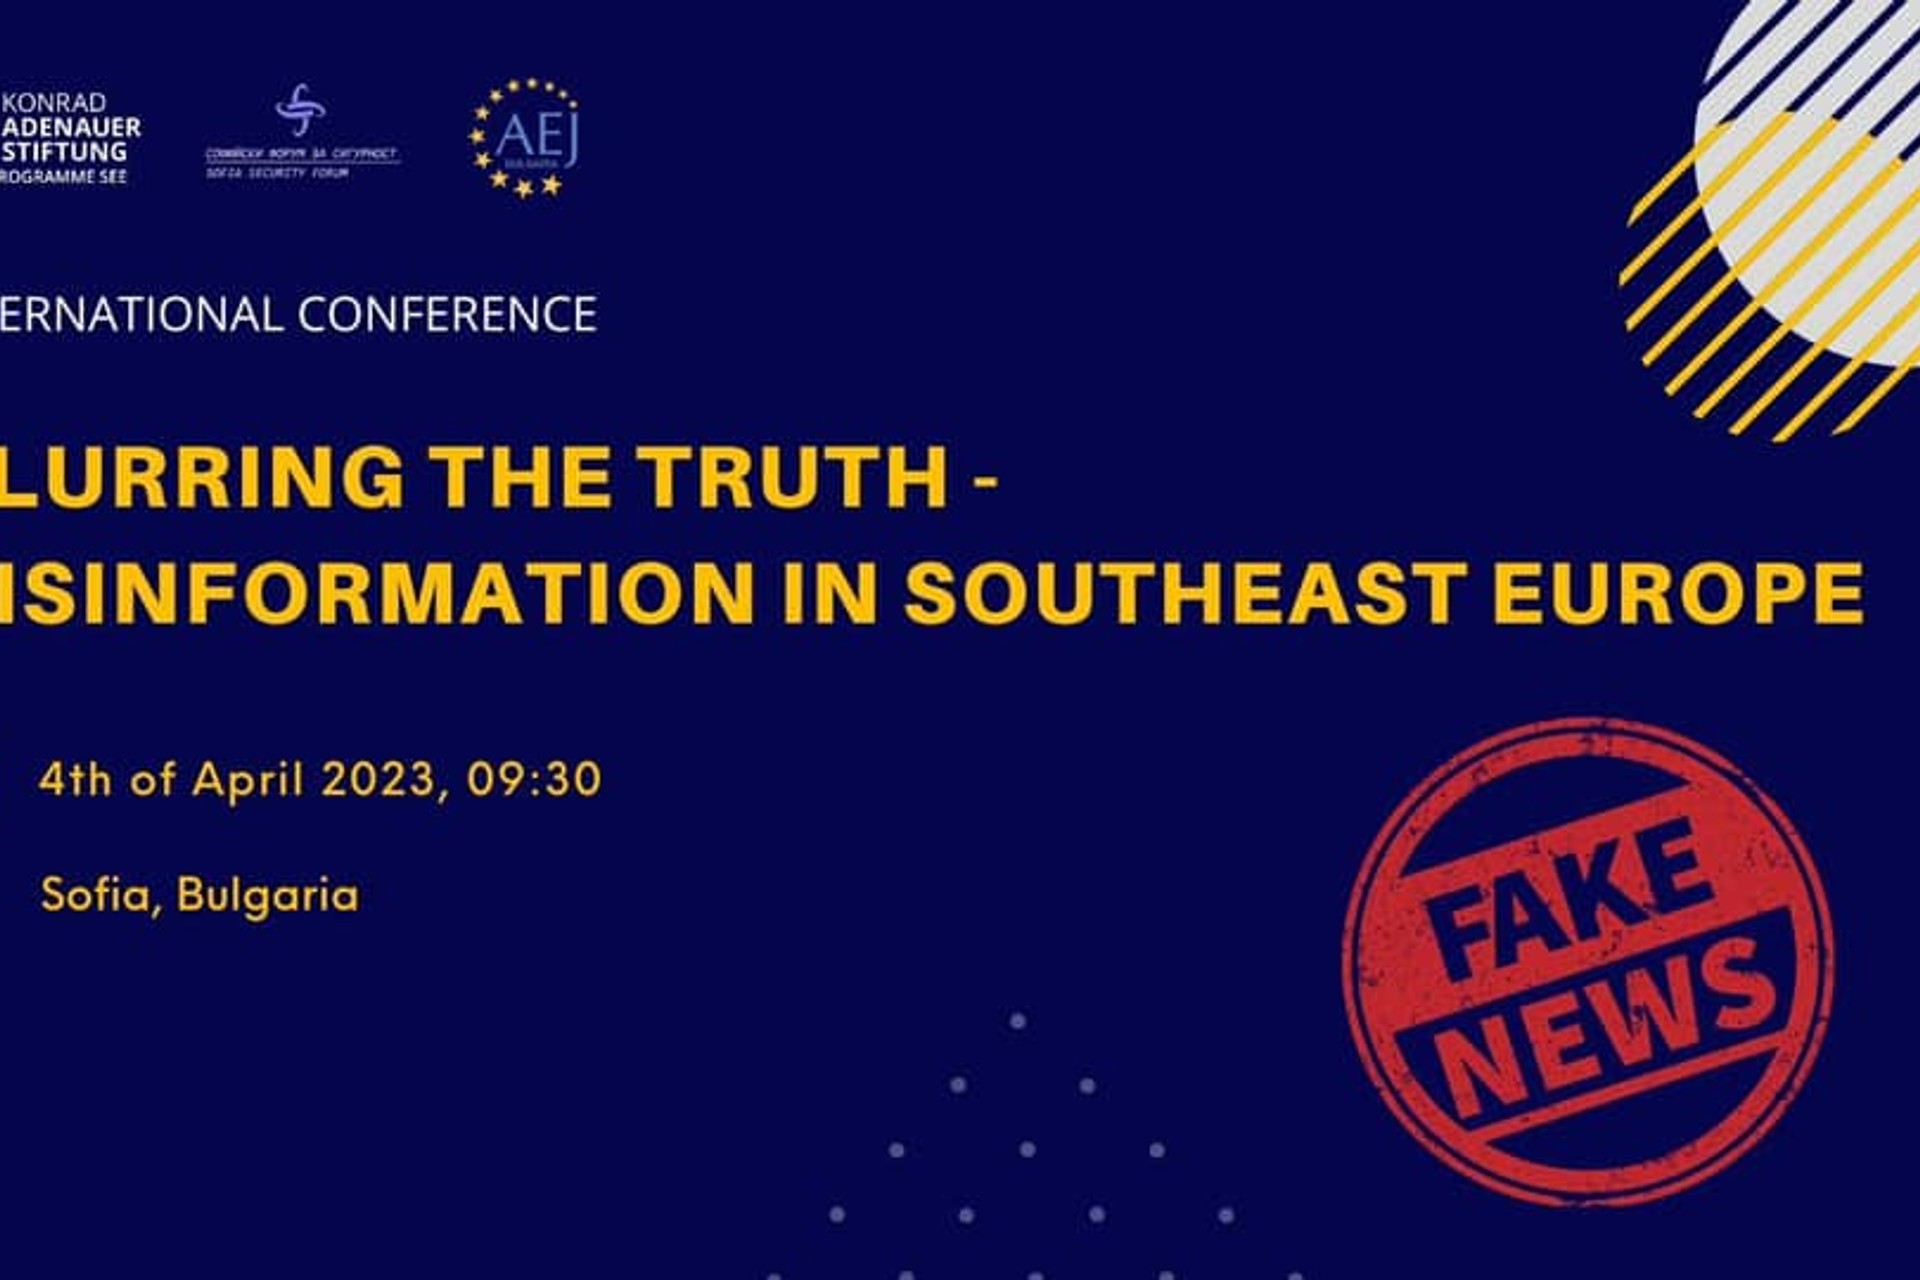 BLURRING THE TRUTH: DISINFORMATION IN SOUTHEAST EUROPE